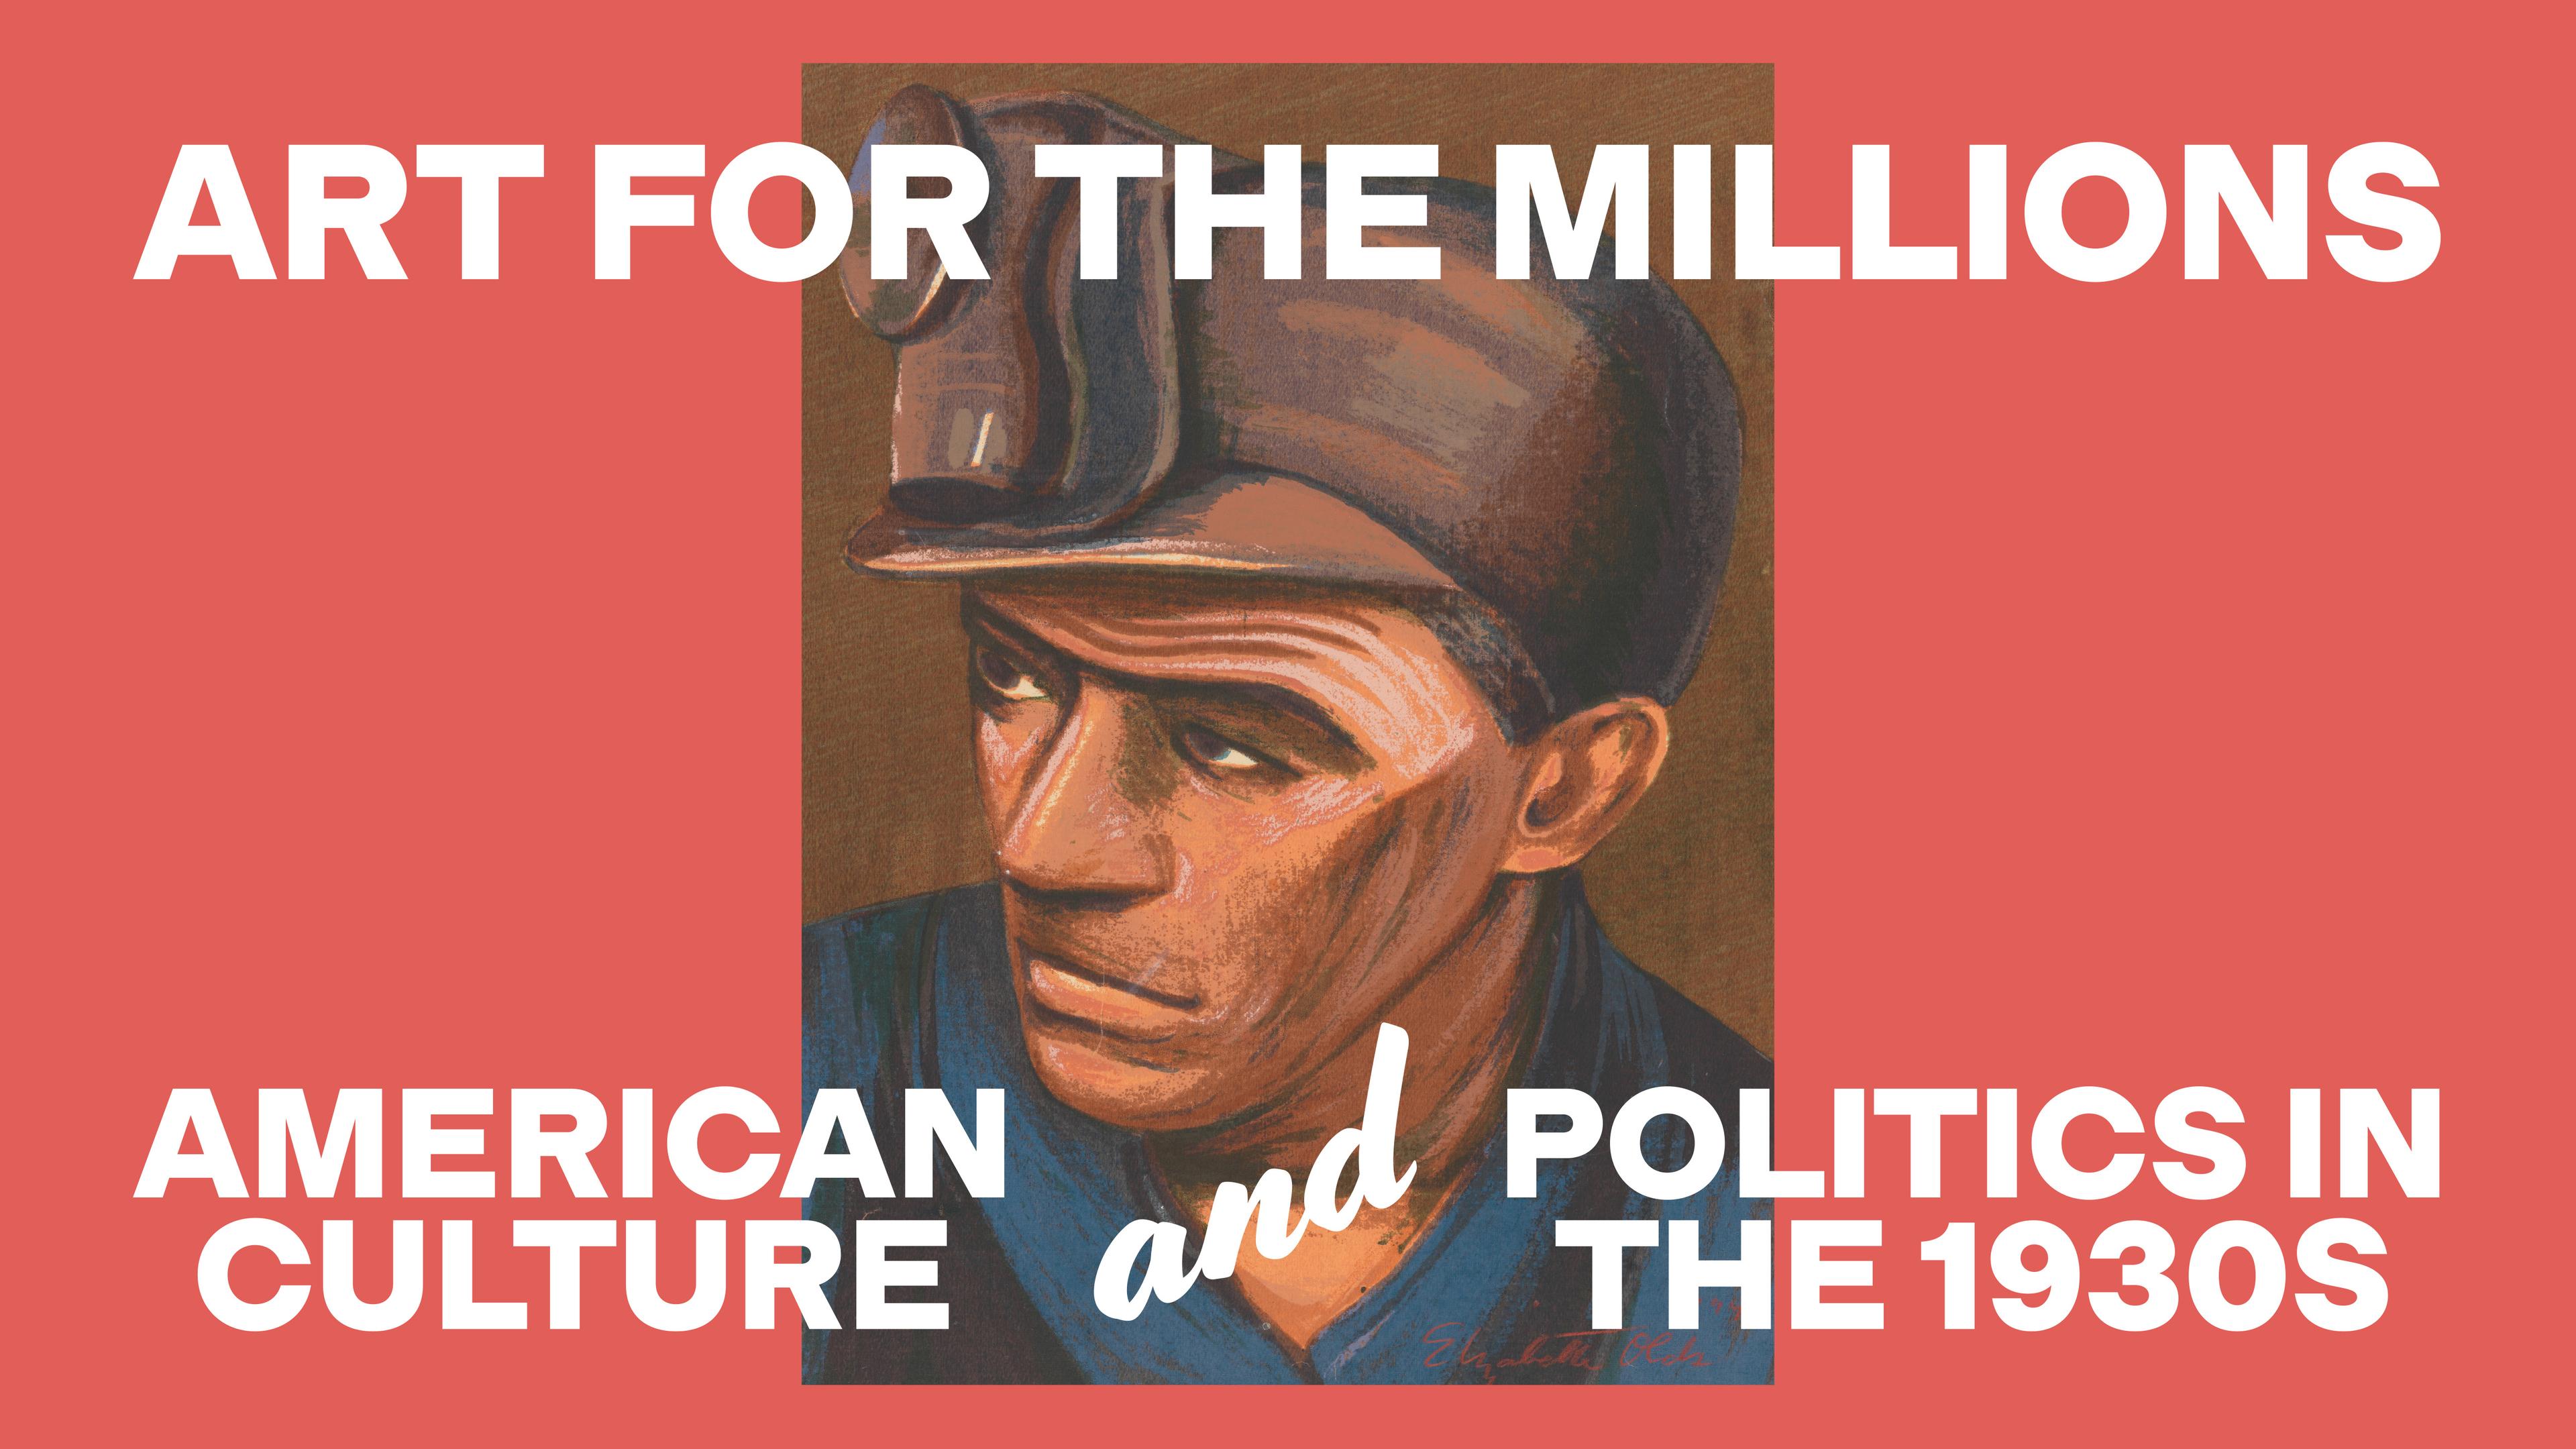 Portrait of a man with a brown cap and text that reads "Art for The Millions"